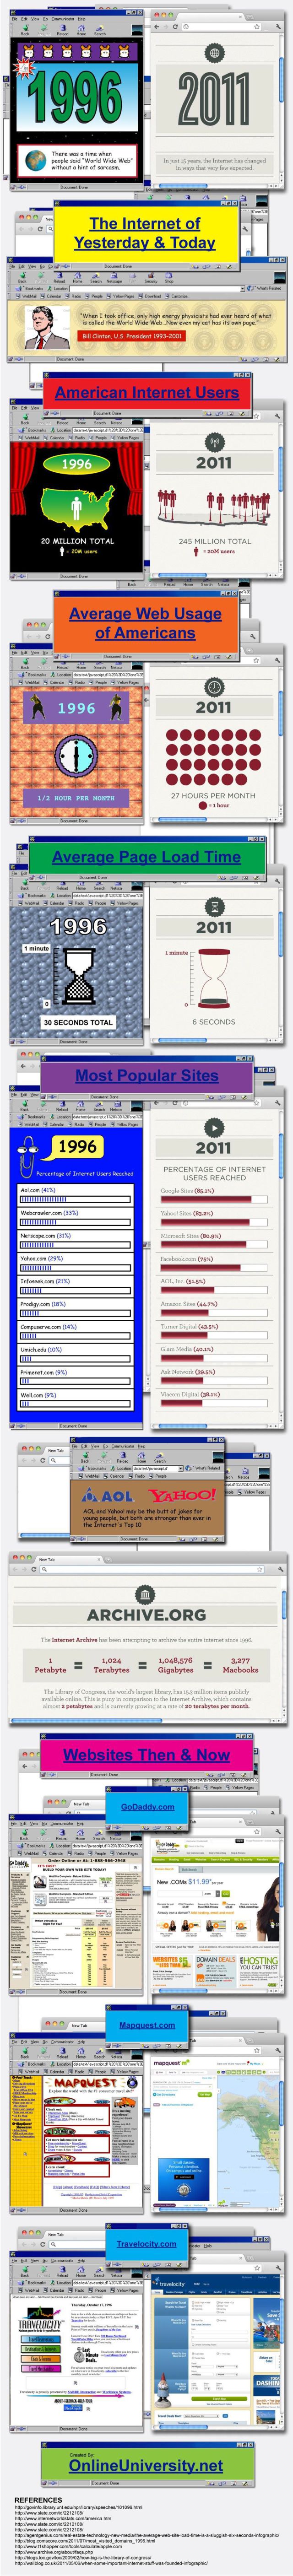 The Evolution of the Internet from 1996 to 2011